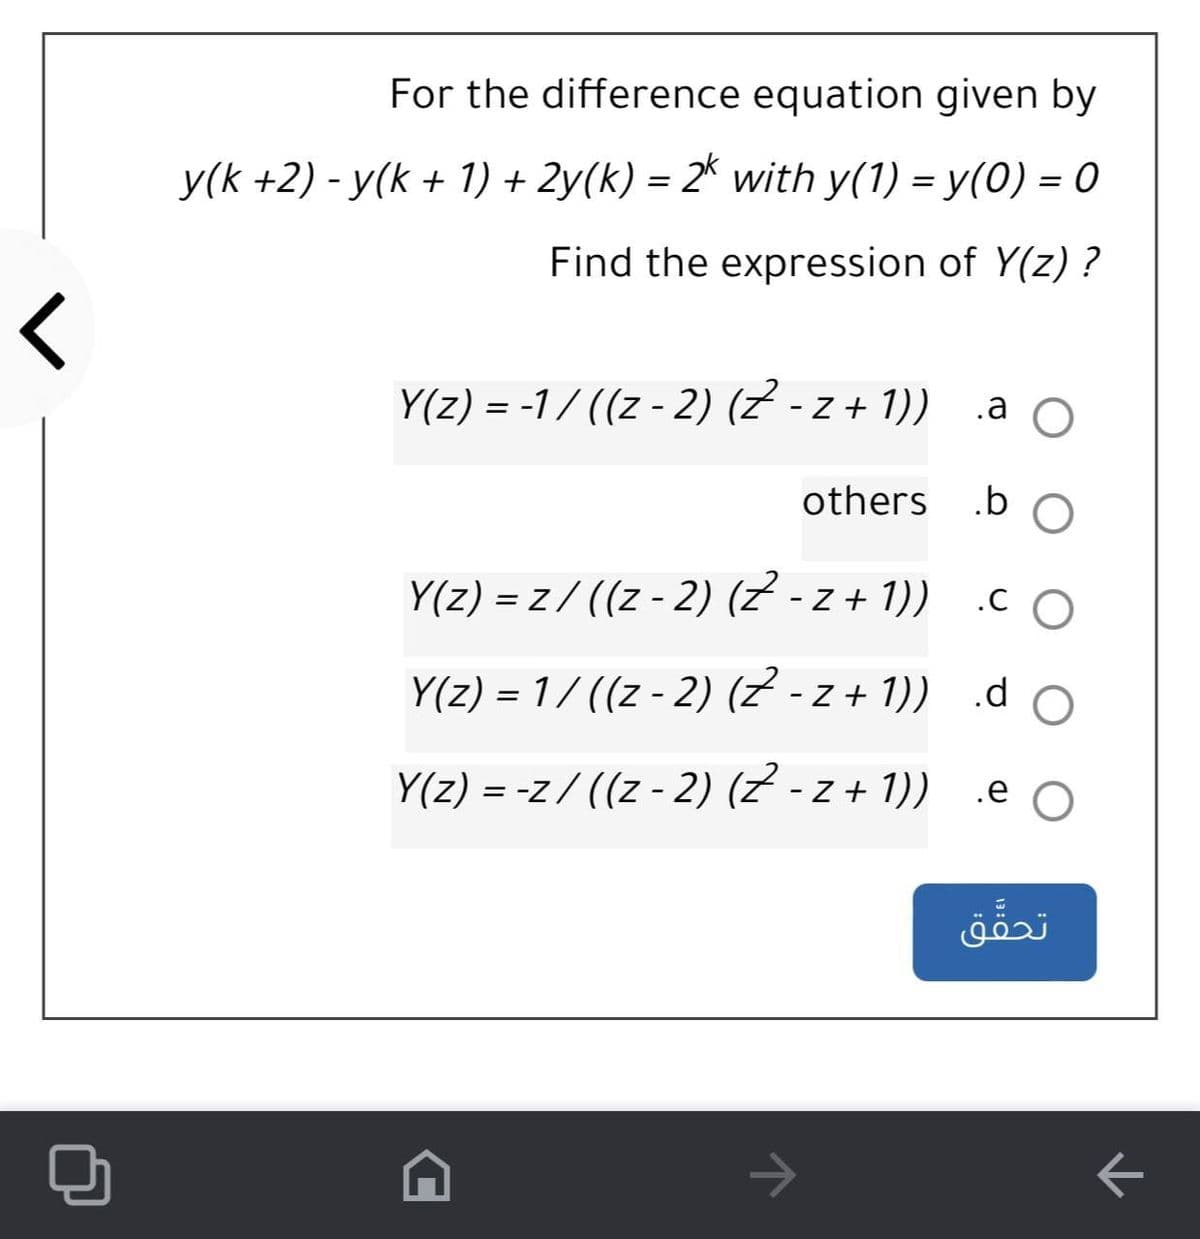 For the difference equation given by
y(k +2) - y(k + 1) + 2y(k) = 2* with y(1) = y(0) = 0
%3D
Find the expression of Y(z) ?
Y(z) = -1/ ((z - 2) (Z - z + 1))
.a O
others
Y(z) = z/ ((z - 2) (z - z + 1))
.C O
Y(z) = 1/ ((z - 2) (Z - z + 1)) .d o
Y(z) = -z/ ((z - 2) (Z - z + 1)) .e O
%3D
تحق ق
